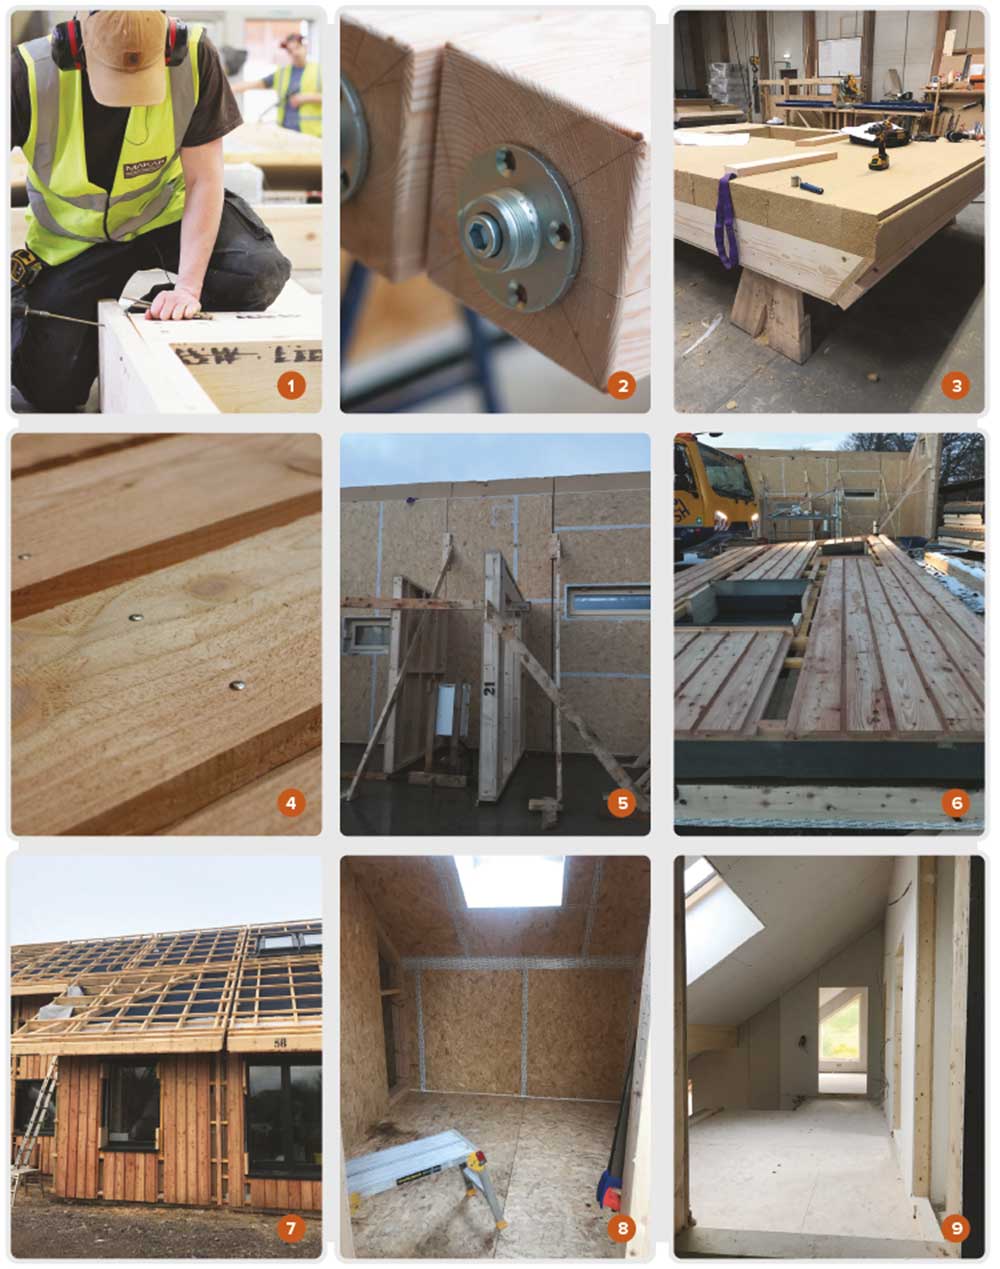 The Makar prefabricated timber frame system being built in their workshop, showing 1 the frame, 2 the postbase, 3 the roof panel, and 4 the cladding; 5 & 6 assembly of the frame on-site; 7 the panels are built complete with insulation, doors, windows, roof and cladding; 8 18 mm OSB board was used as an internal airtight layer, and taped at all junctions; 9 the walls are fi nished inside with plasterboard enclosing a woodfi bre-insulated service cavity.